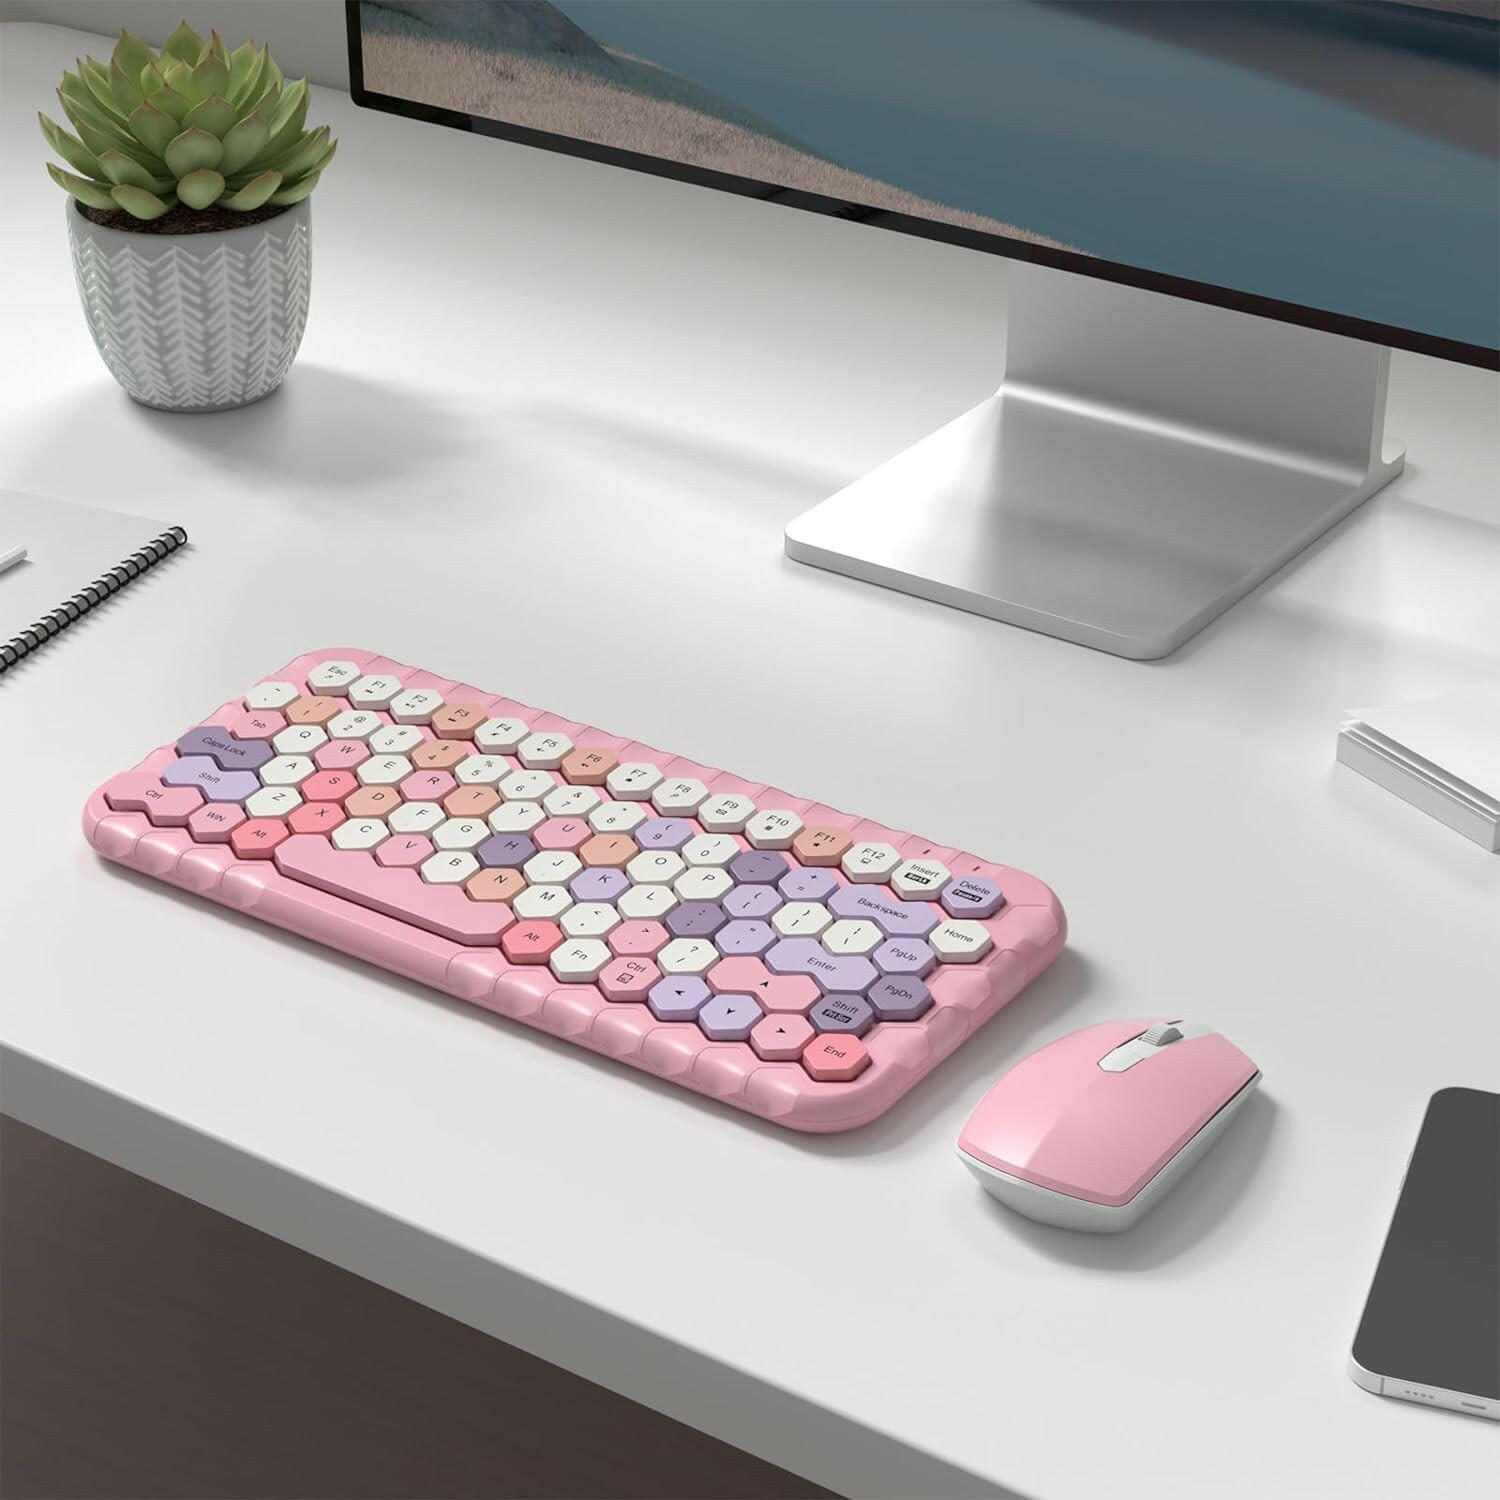 MOFII Wireless Keyboard and Mouse - Pink - TapElf